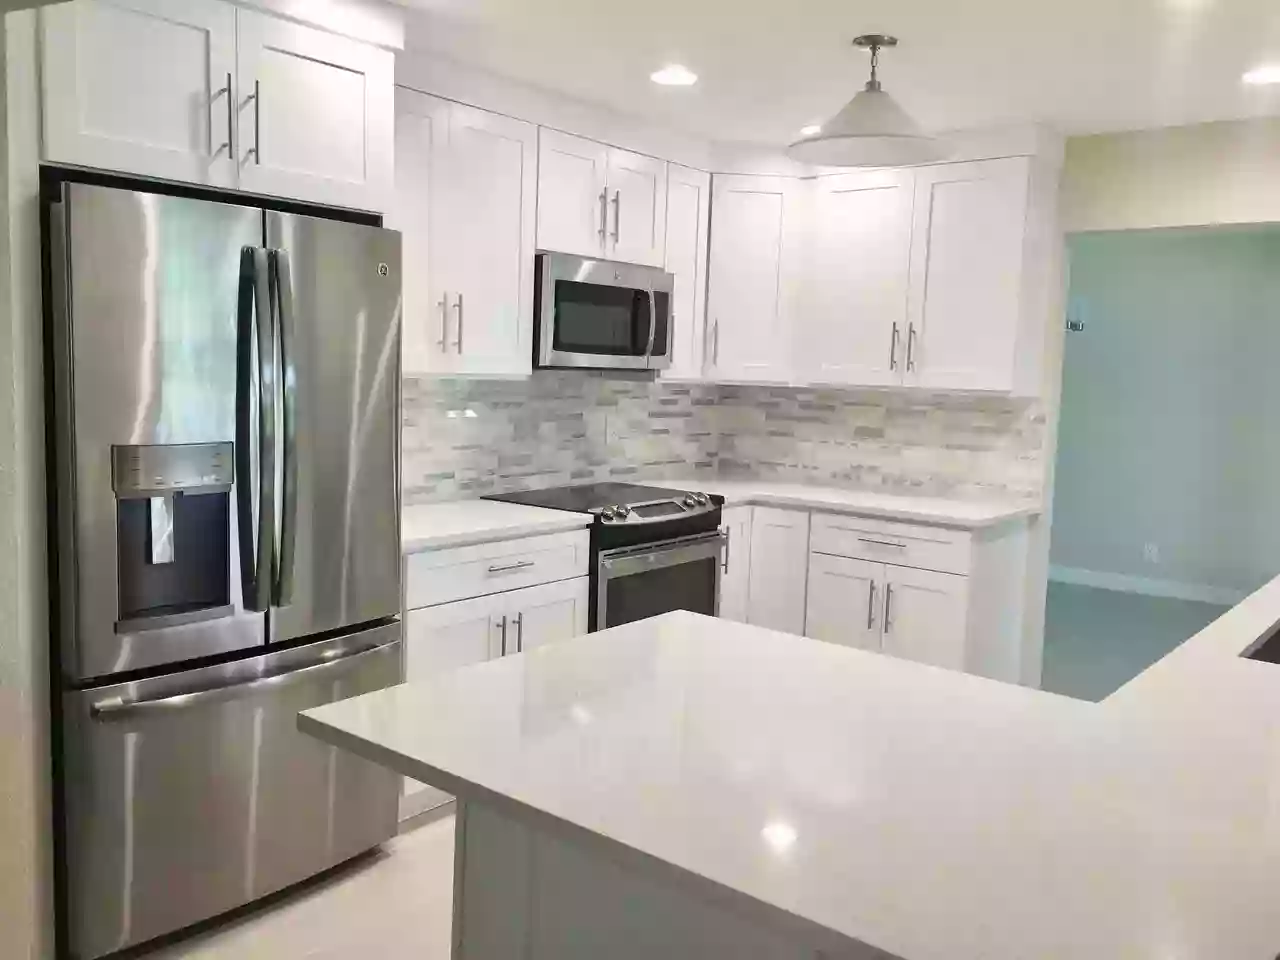 Cabinets Countertops And More, Inc